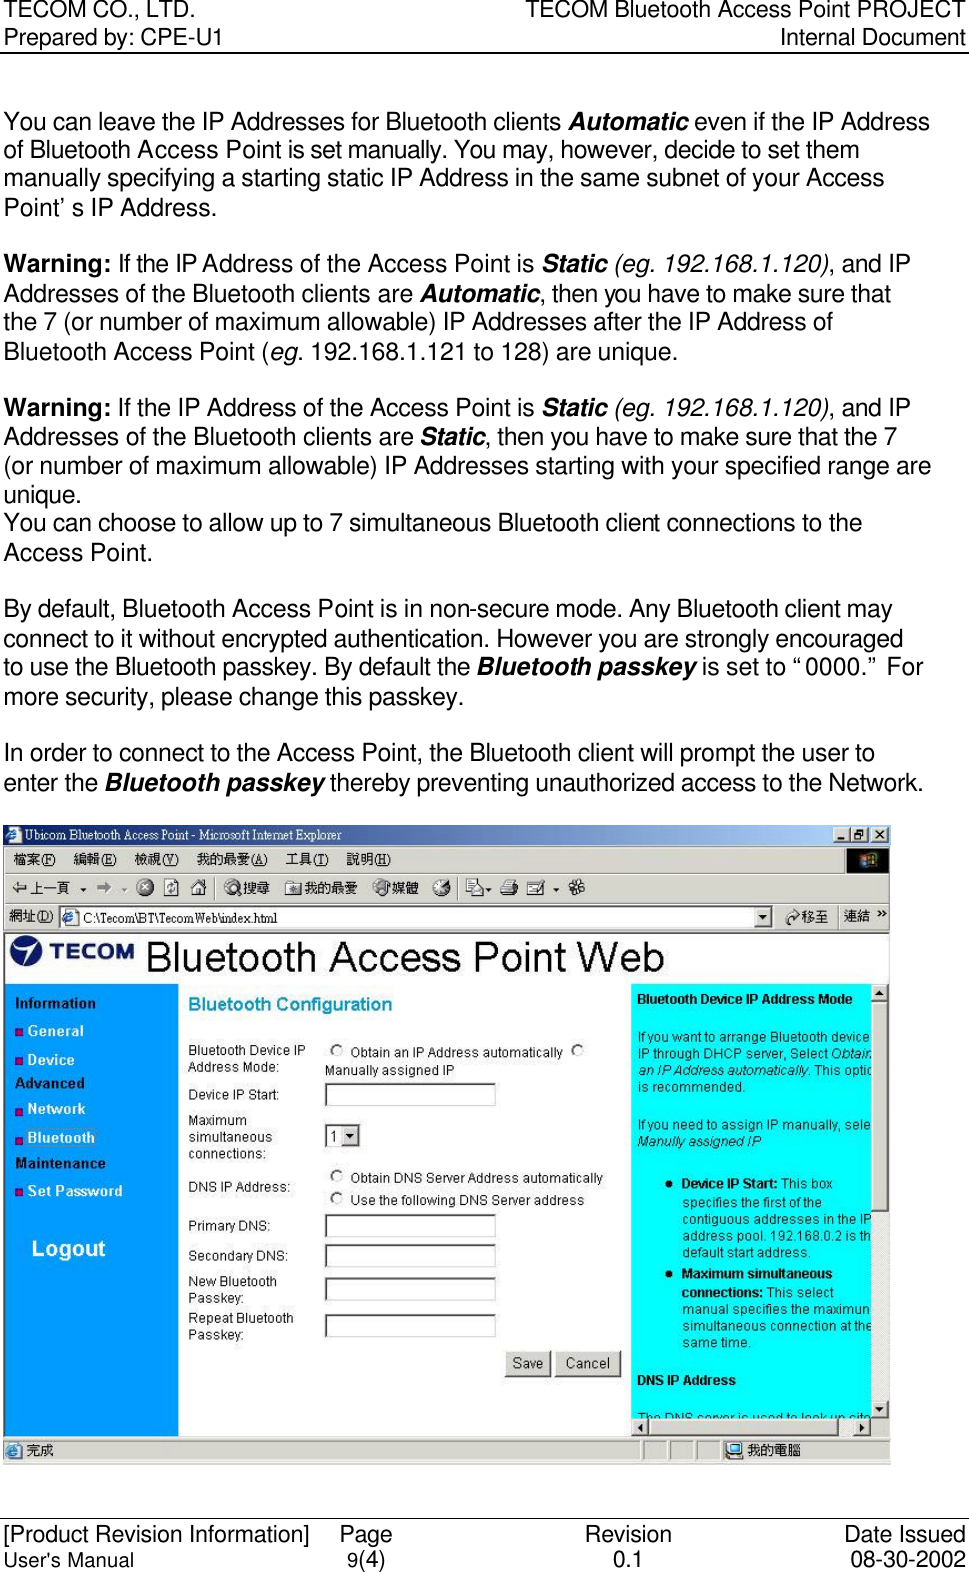 TECOM CO., LTD. TECOM Bluetooth Access Point PROJECT Prepared by: CPE-U1   Internal Document  [Product Revision Information] Page Revision Date Issued User&apos;s Manual 9(4) 0.1 08-30-2002  You can leave the IP Addresses for Bluetooth clients Automatic even if the IP Address of Bluetooth Access Point is set manually. You may, however, decide to set them manually specifying a starting static IP Address in the same subnet of your Access Point’s IP Address.    Warning: If the IP Address of the Access Point is Static (eg. 192.168.1.120), and IP Addresses of the Bluetooth clients are Automatic, then you have to make sure that the 7 (or number of maximum allowable) IP Addresses after the IP Address of Bluetooth Access Point (eg. 192.168.1.121 to 128) are unique.    Warning: If the IP Address of the Access Point is Static (eg. 192.168.1.120), and IP Addresses of the Bluetooth clients are Static, then you have to make sure that the 7 (or number of maximum allowable) IP Addresses starting with your specified range are unique.   You can choose to allow up to 7 simultaneous Bluetooth client connections to the Access Point.  By default, Bluetooth Access Point is in non-secure mode. Any Bluetooth client may connect to it without encrypted authentication. However you are strongly encouraged to use the Bluetooth passkey. By default the Bluetooth passkey is set to “0000.” For more security, please change this passkey.    In order to connect to the Access Point, the Bluetooth client will prompt the user to enter the Bluetooth passkey thereby preventing unauthorized access to the Network.  